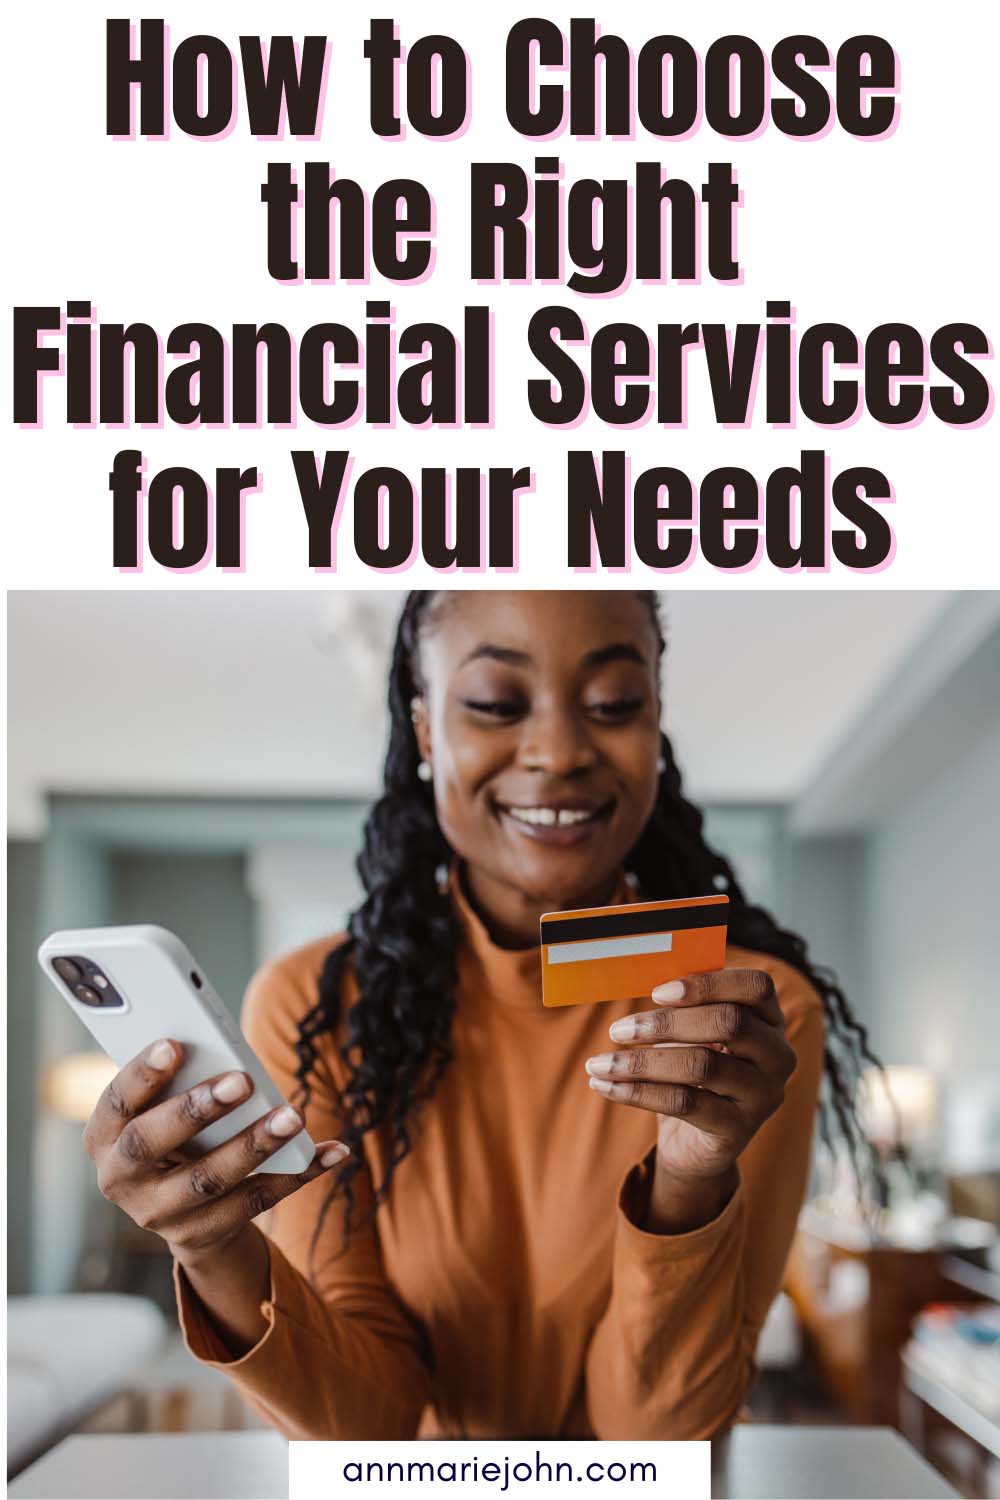 How to Choose the Right Financial Services for Your Needs